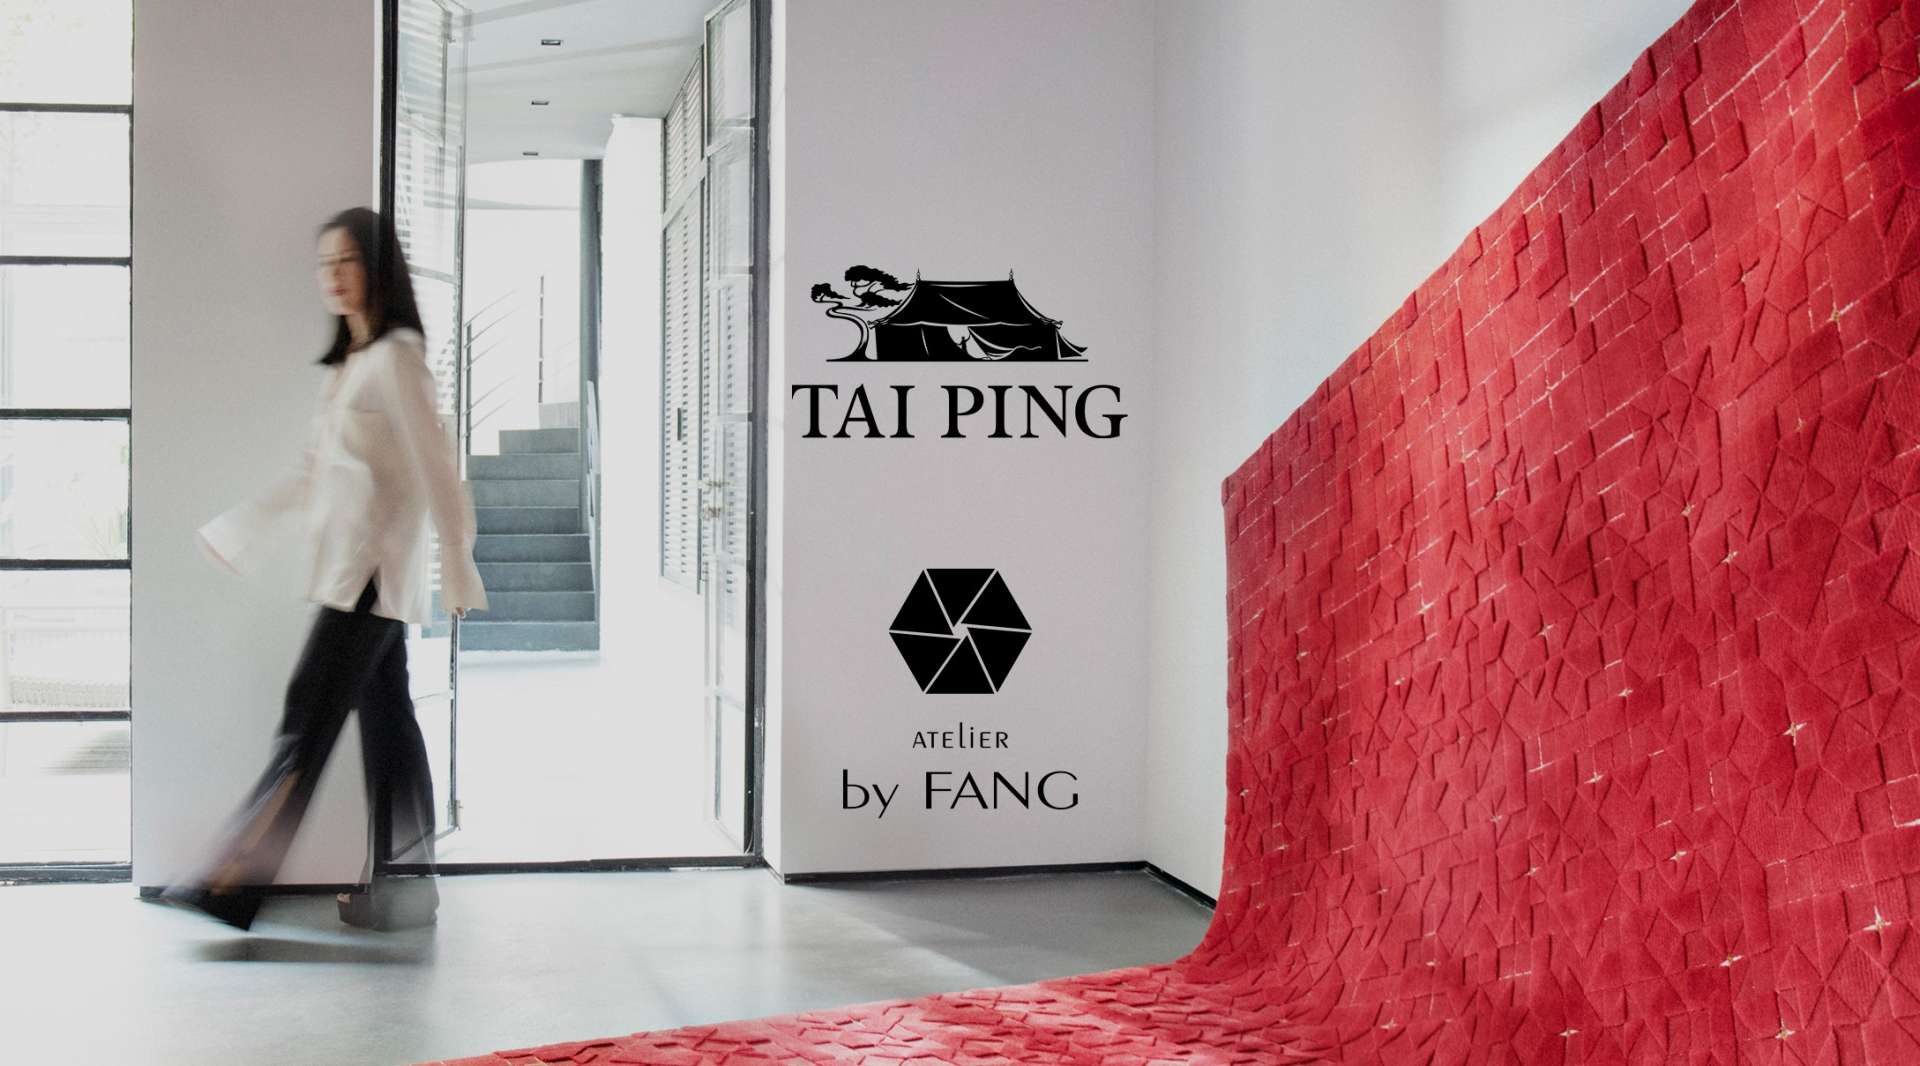 Atelier by FANG × House of Tai Ping